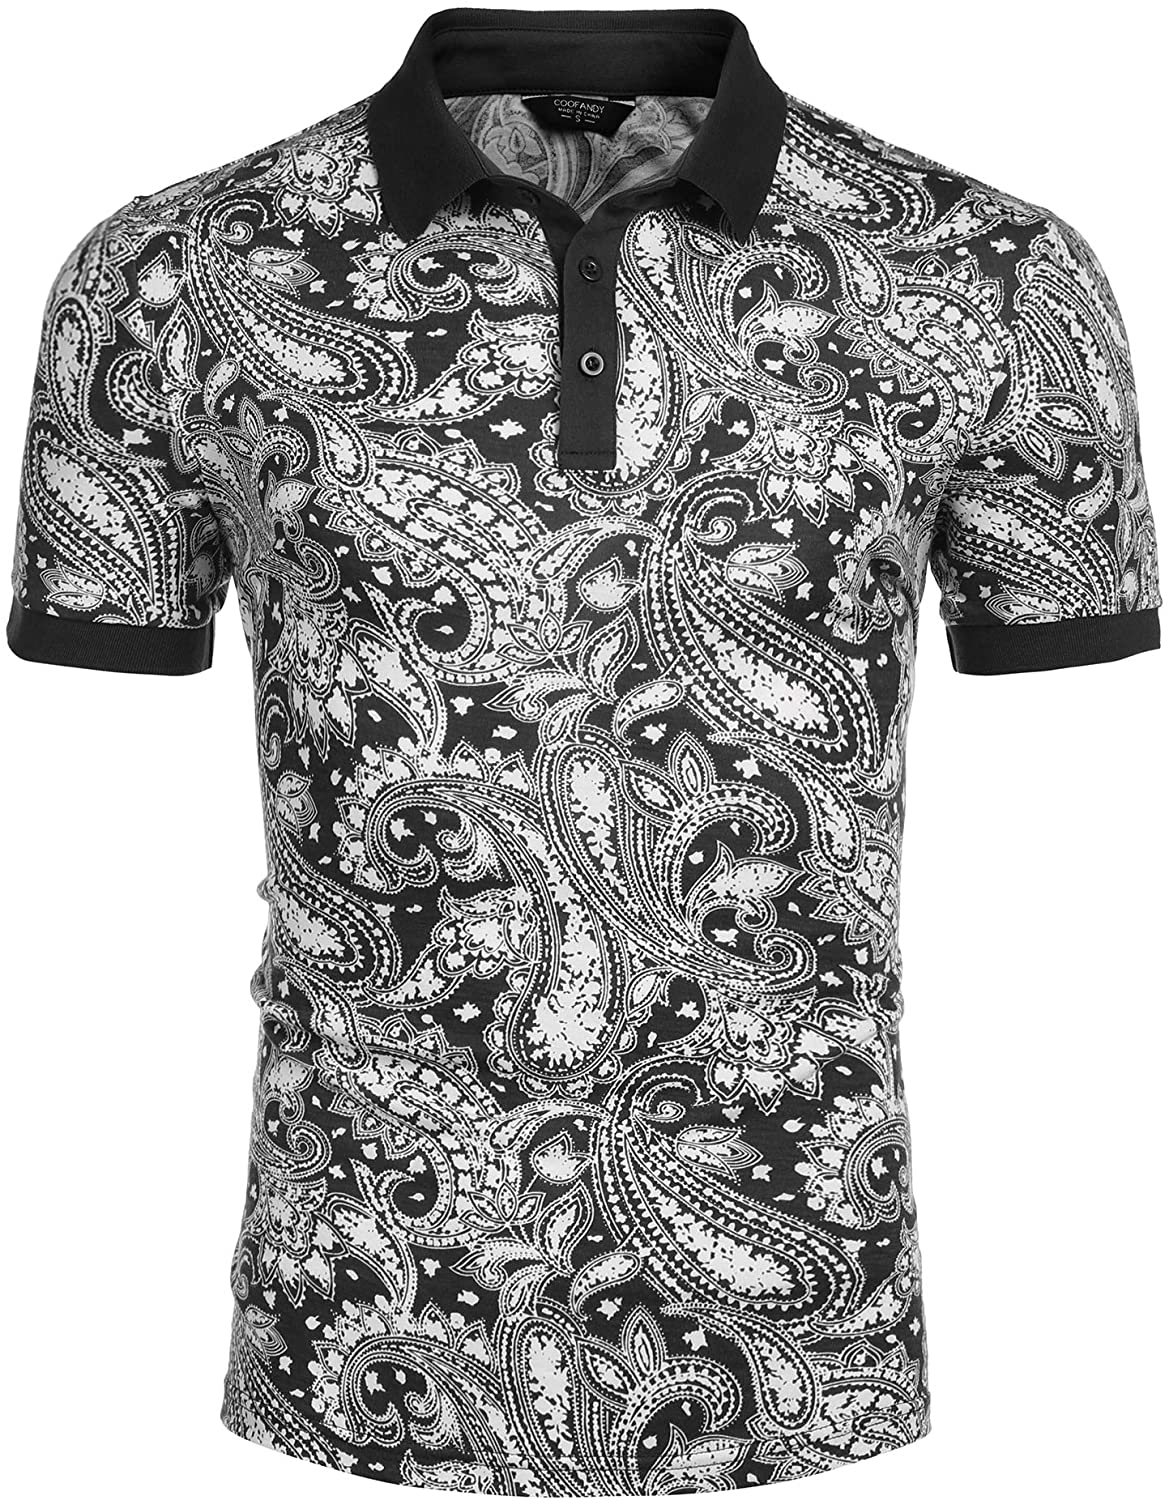 COOFANDY Men's Casual Cotton Short Sleeve Polo Shirts Floral Print Polo T-Shirts 